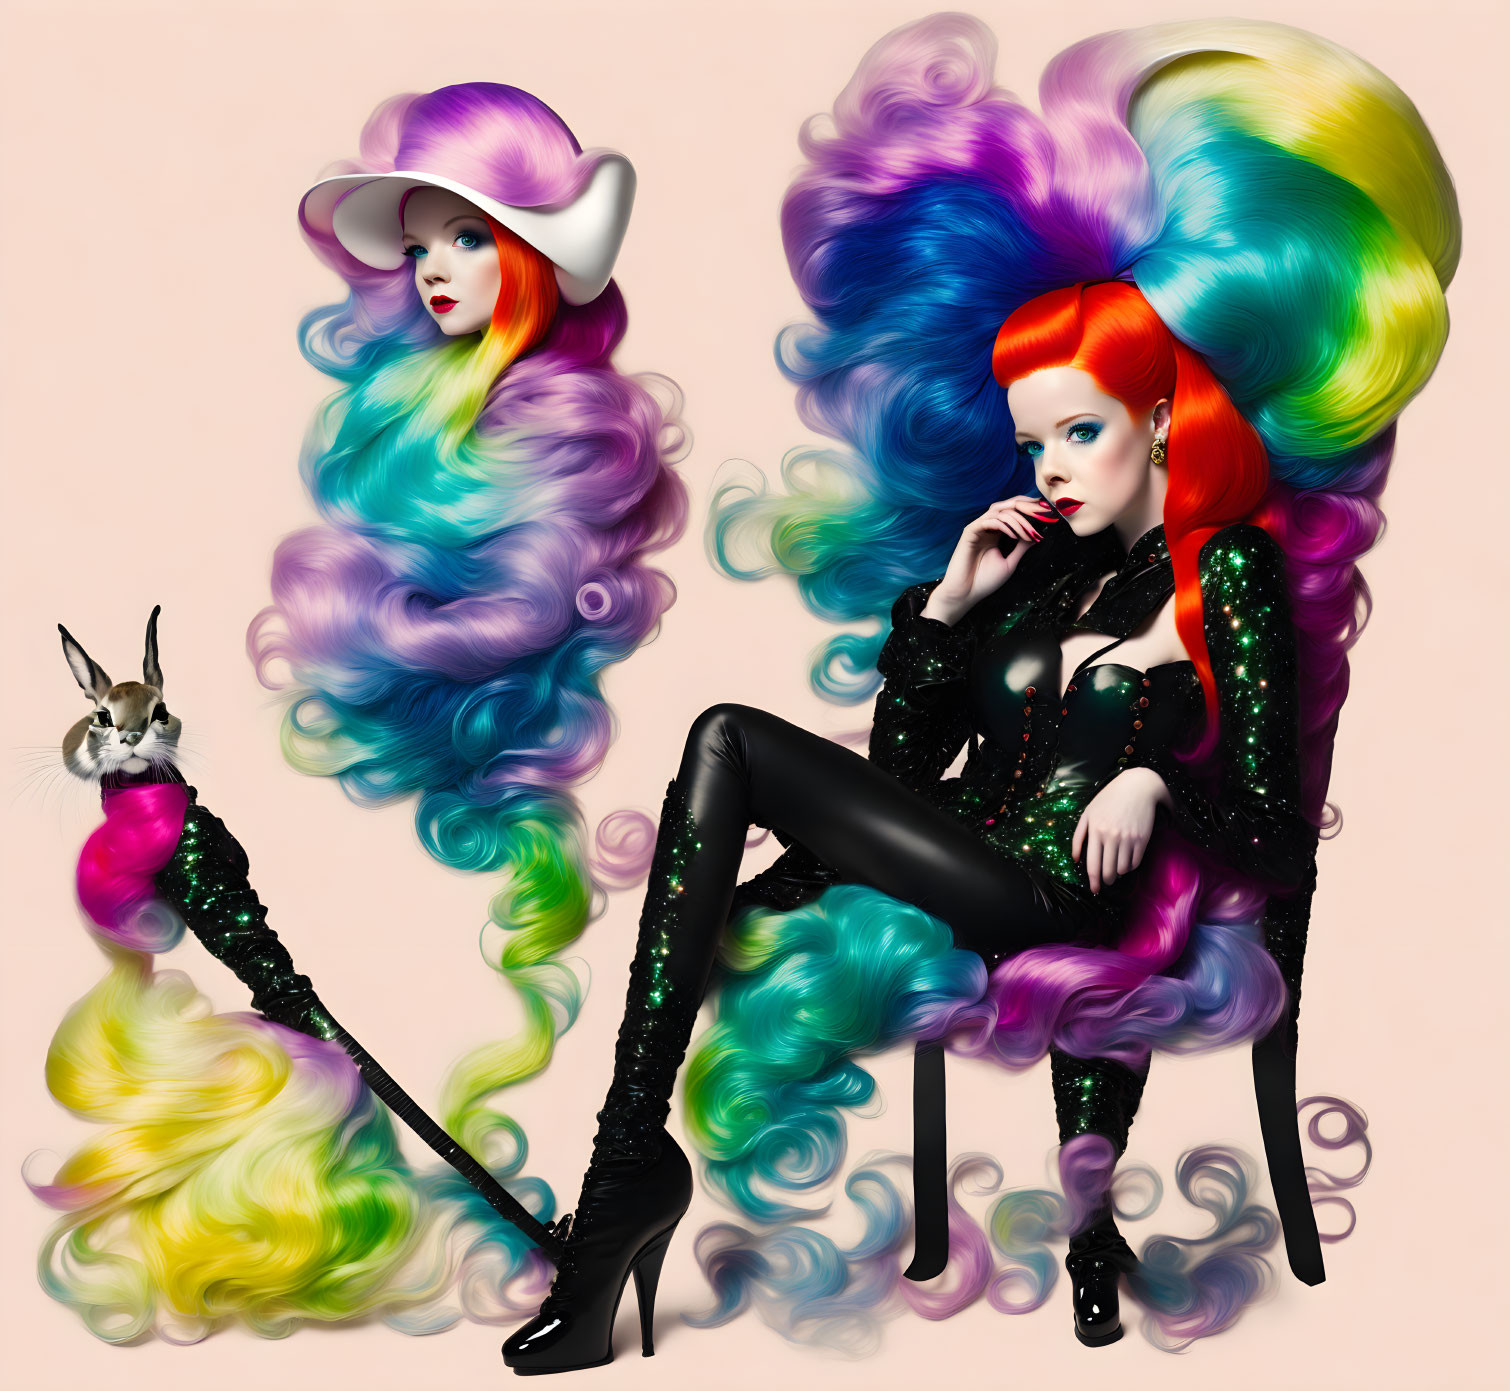 Stylized illustrations: Women with vibrant, multicolored hair next to a rabbit